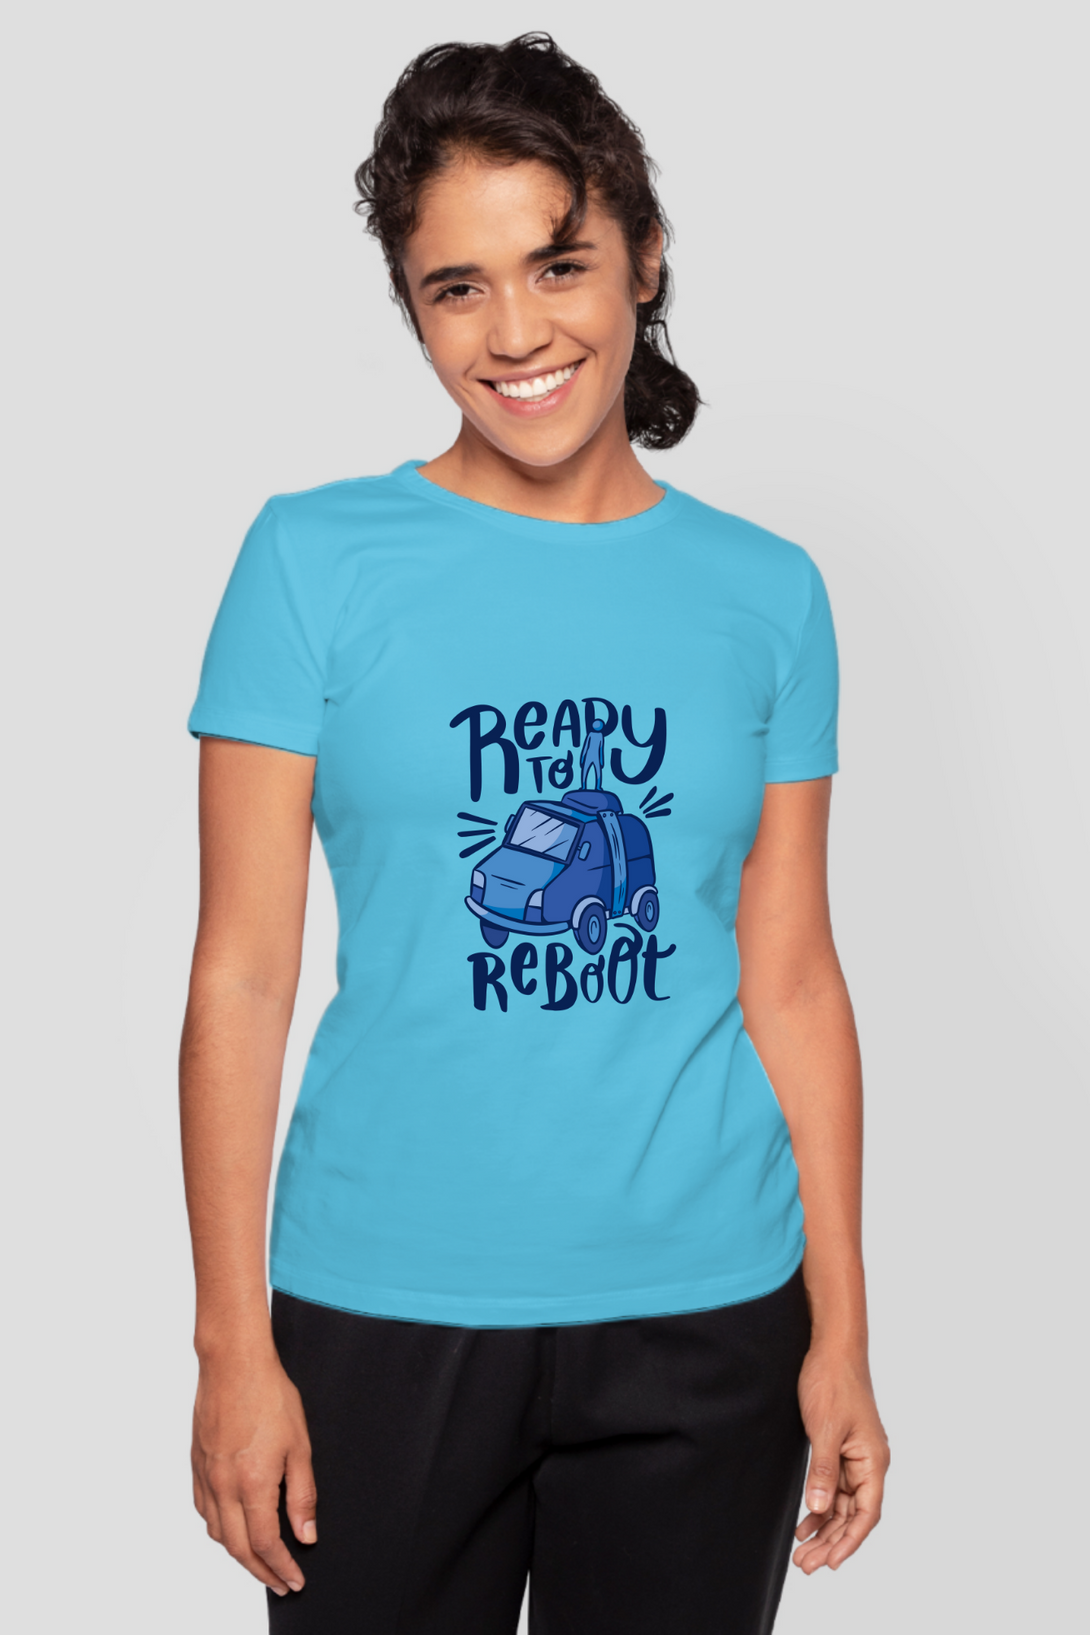 Ready To Reboot Printed T-Shirt For Women - WowWaves - 9